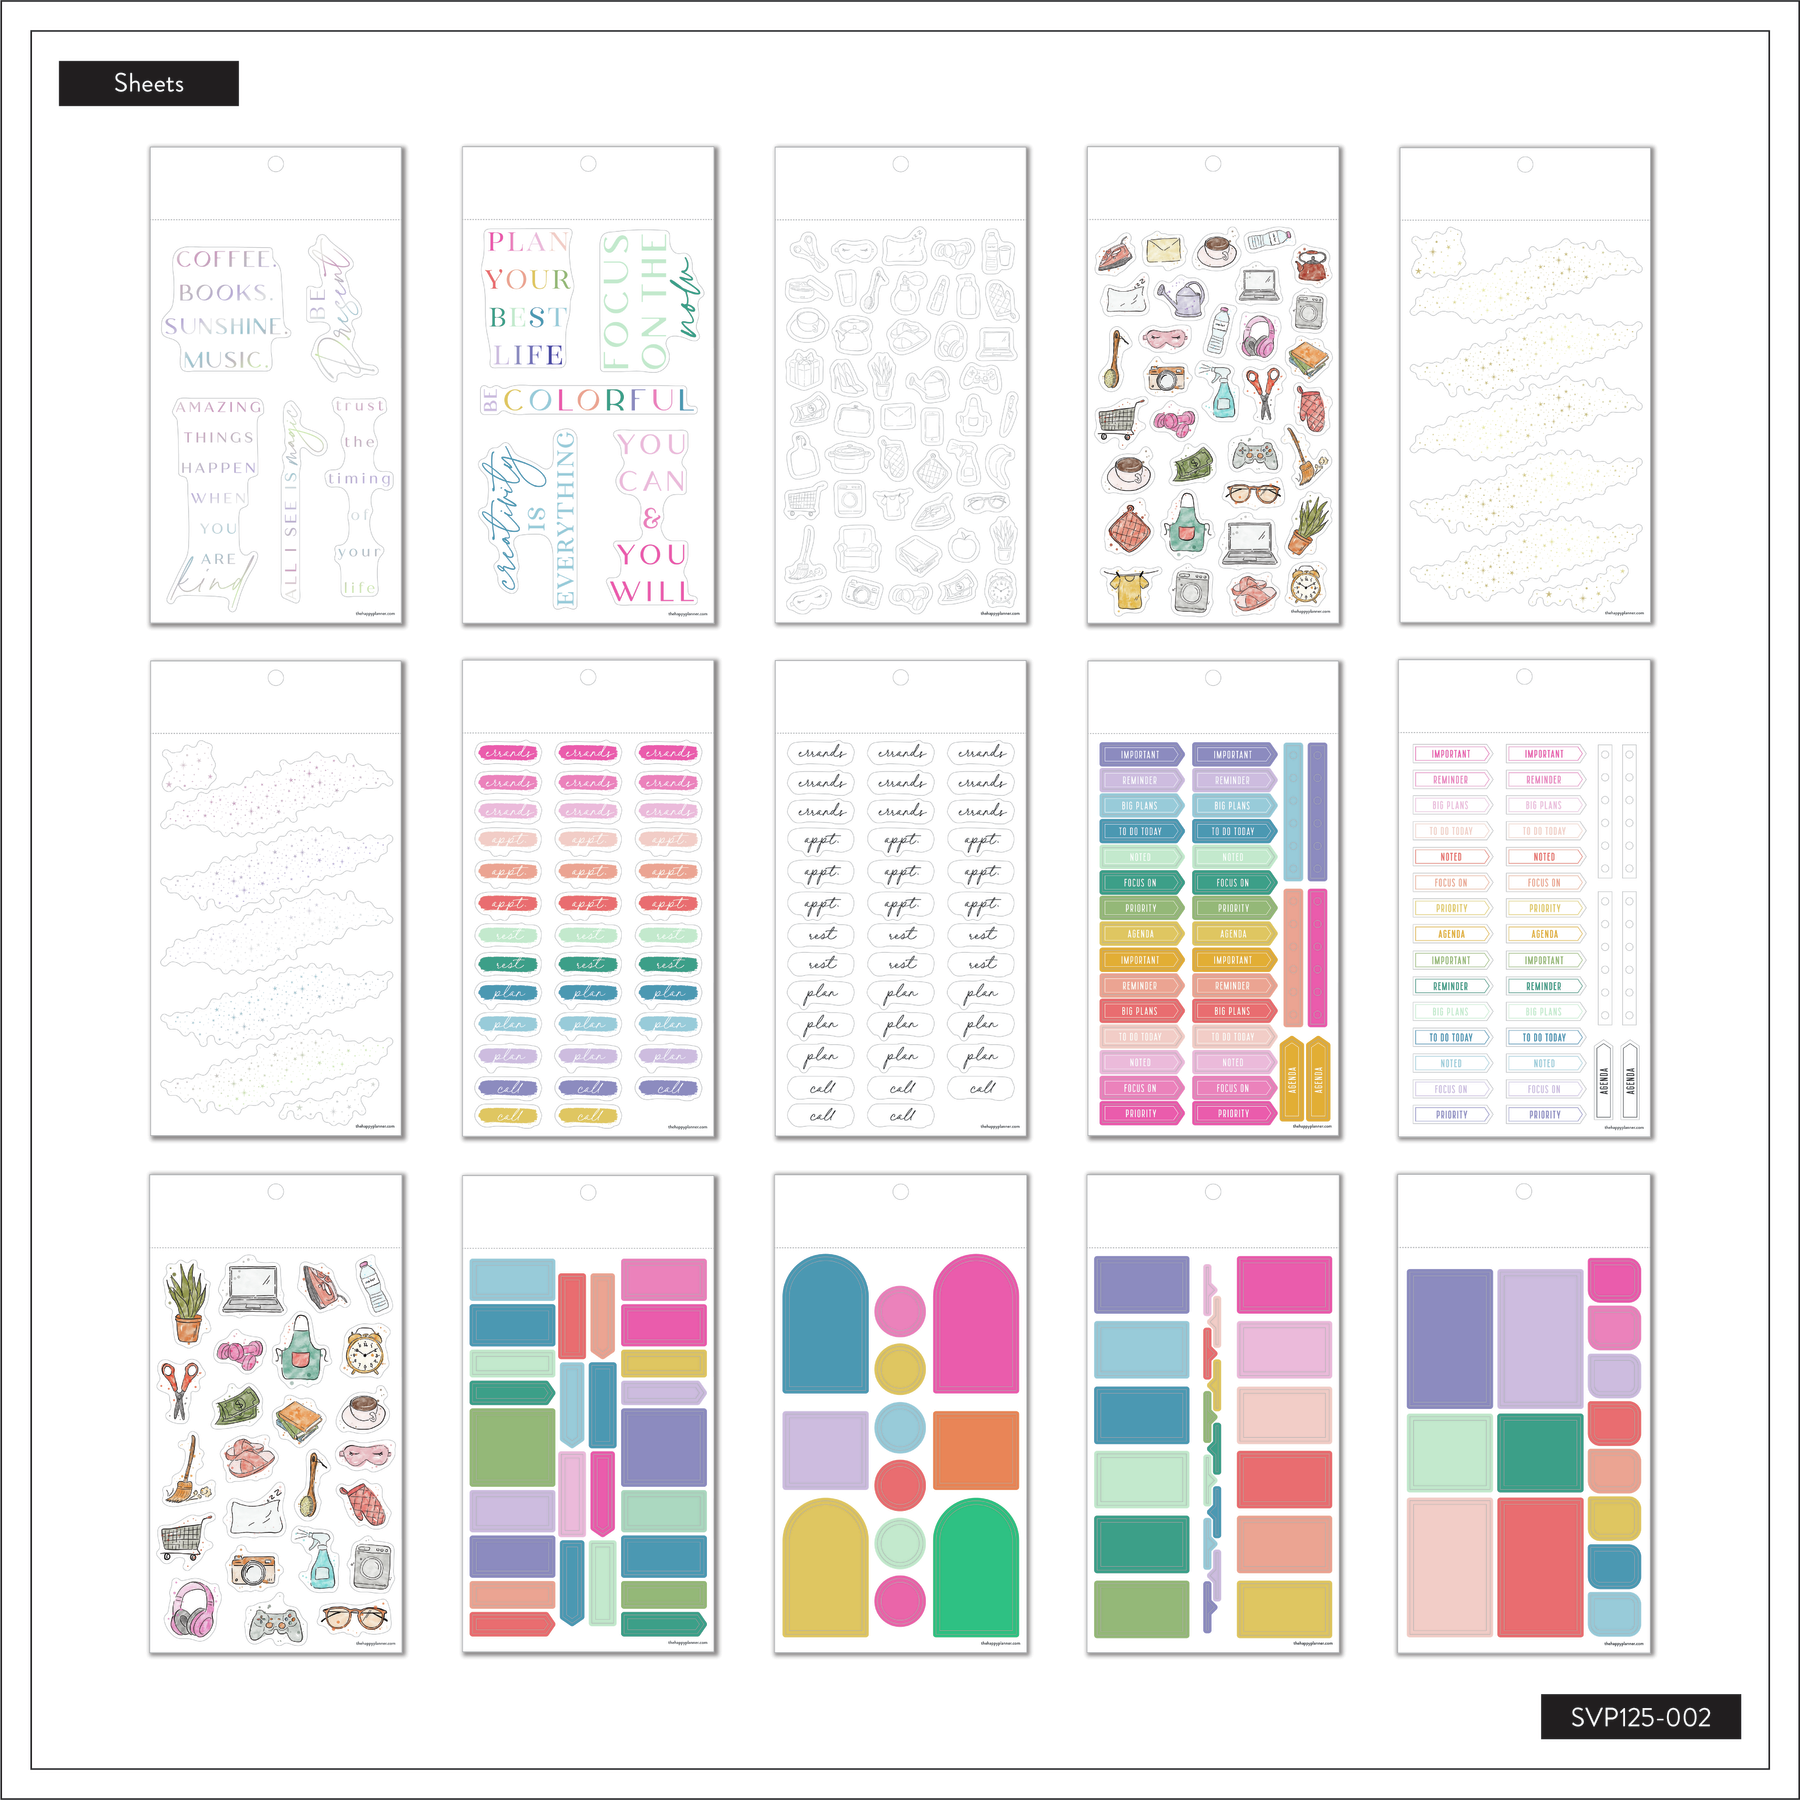 Value Pack Stickers - Bookish – The Happy Planner